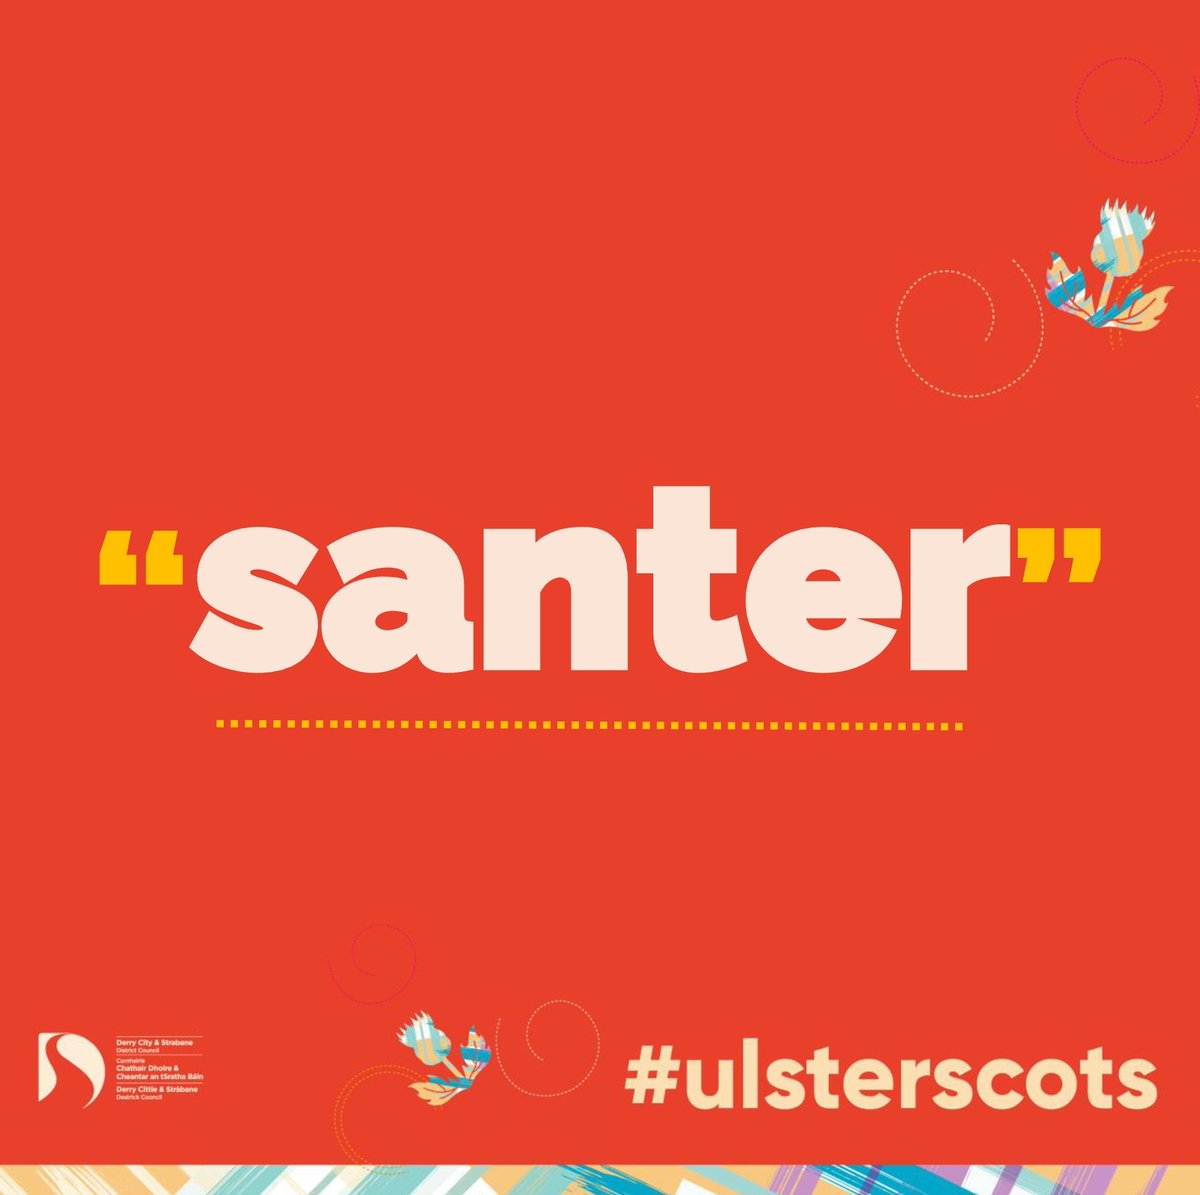 Santer (verb): to talk, chatter, chat, or blether #UlsterScots